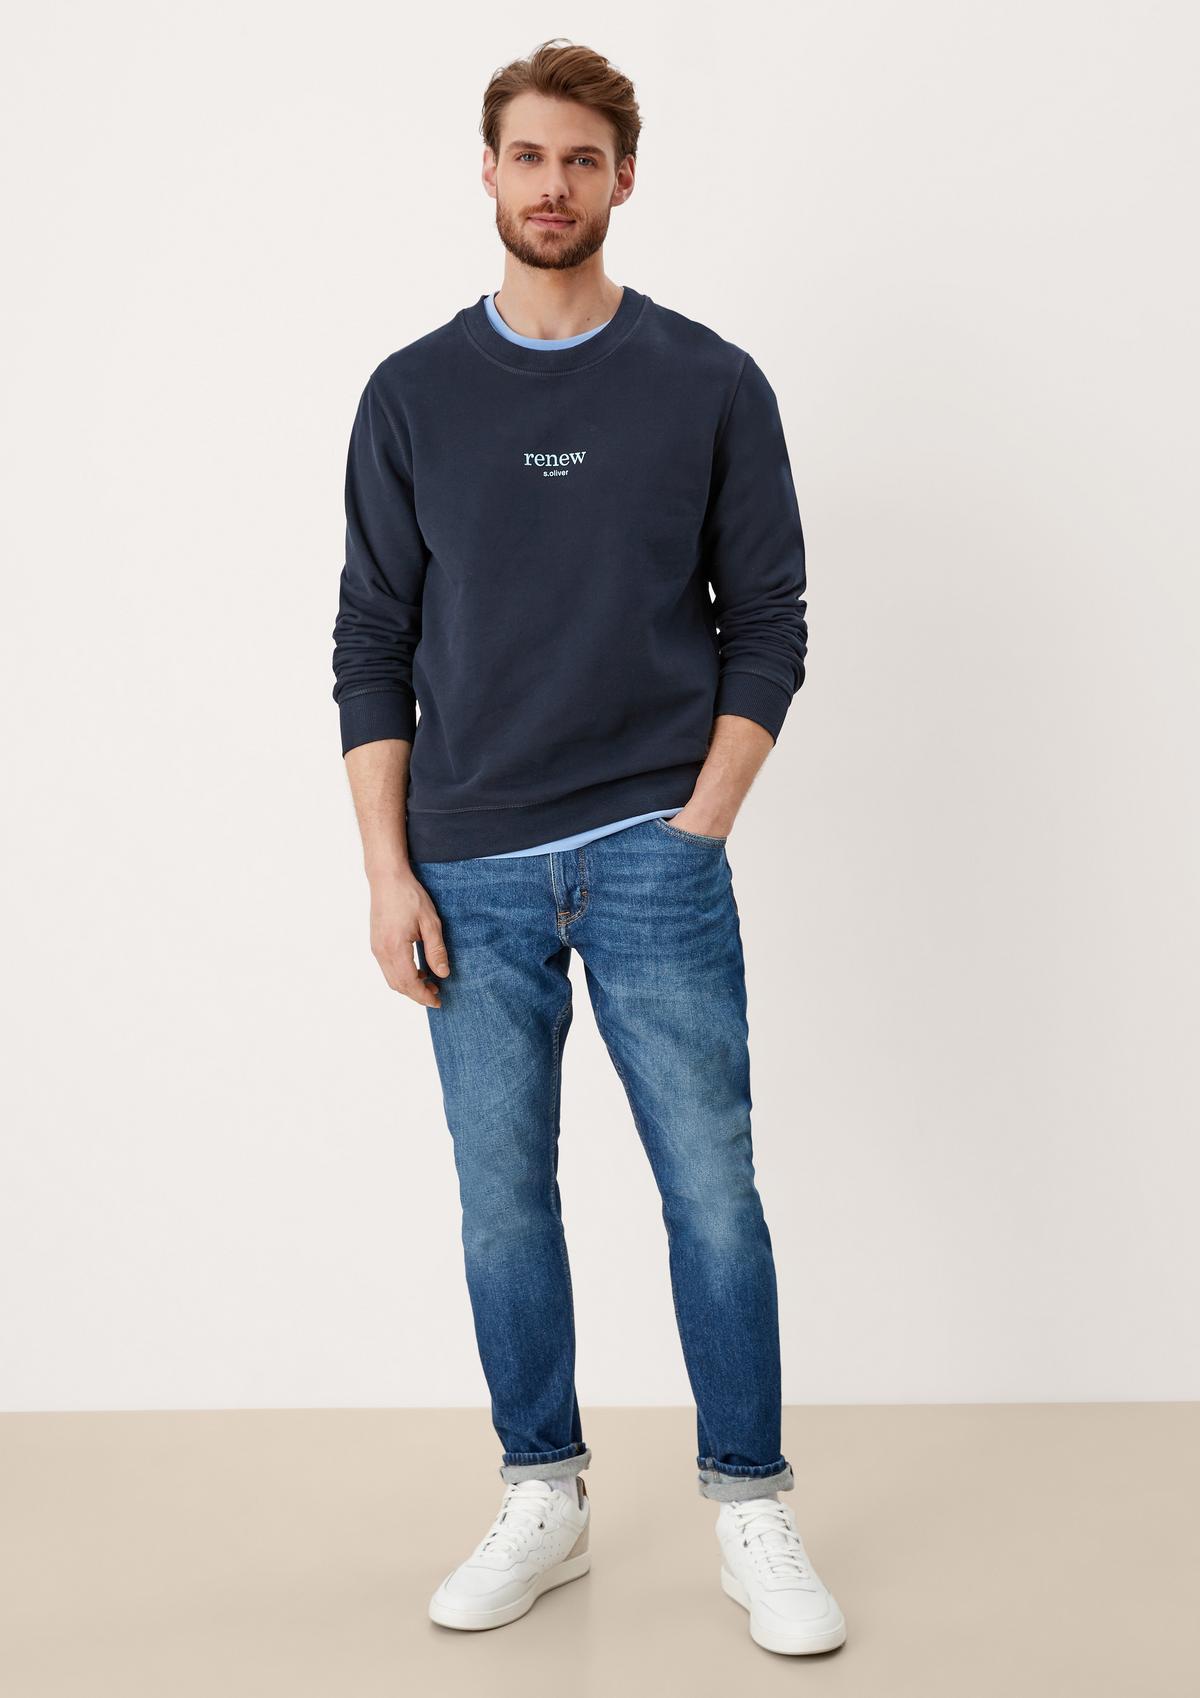 s.Oliver Sweatshirt with printed lettering